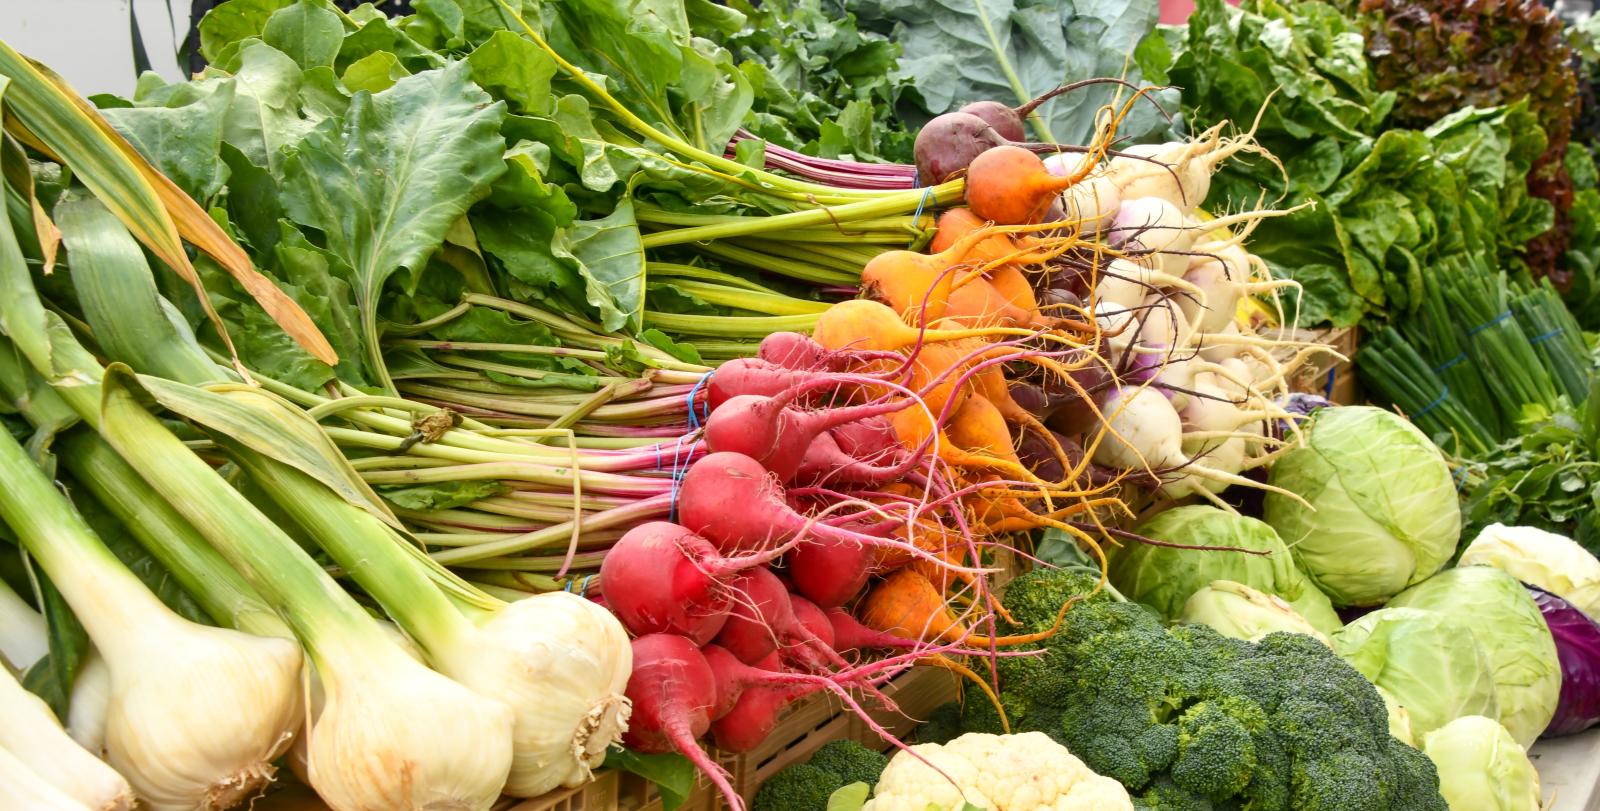 Colorful vegetables at a farmers market table: onions, radishes, beets, cauliflower, broccoli, and cabbage.